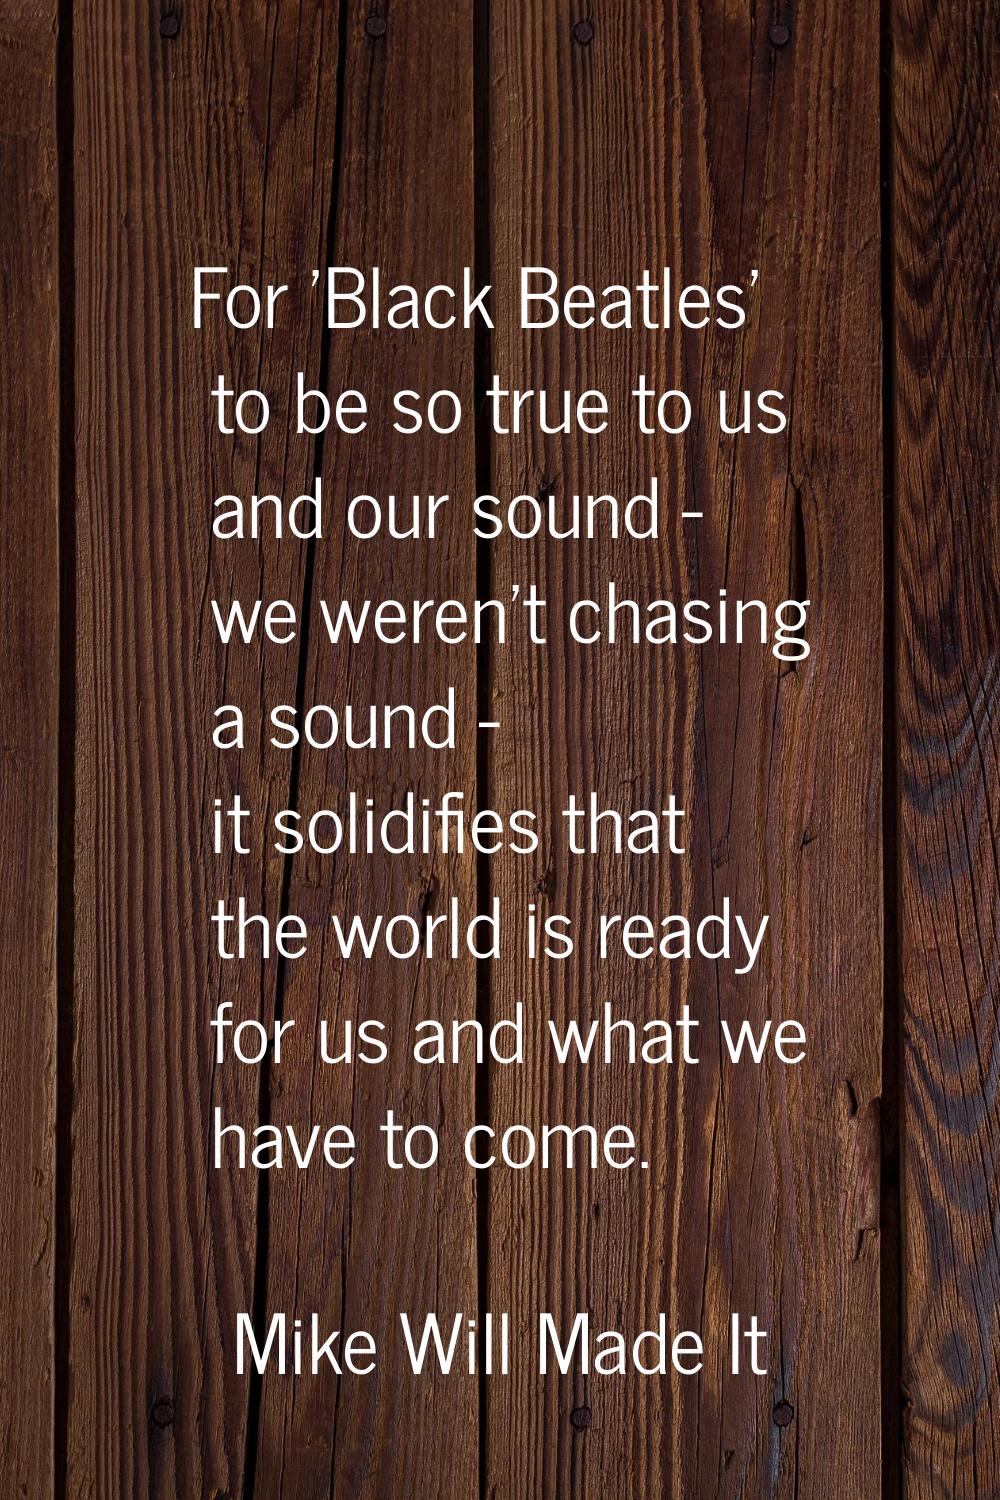 For 'Black Beatles' to be so true to us and our sound - we weren't chasing a sound - it solidifies 